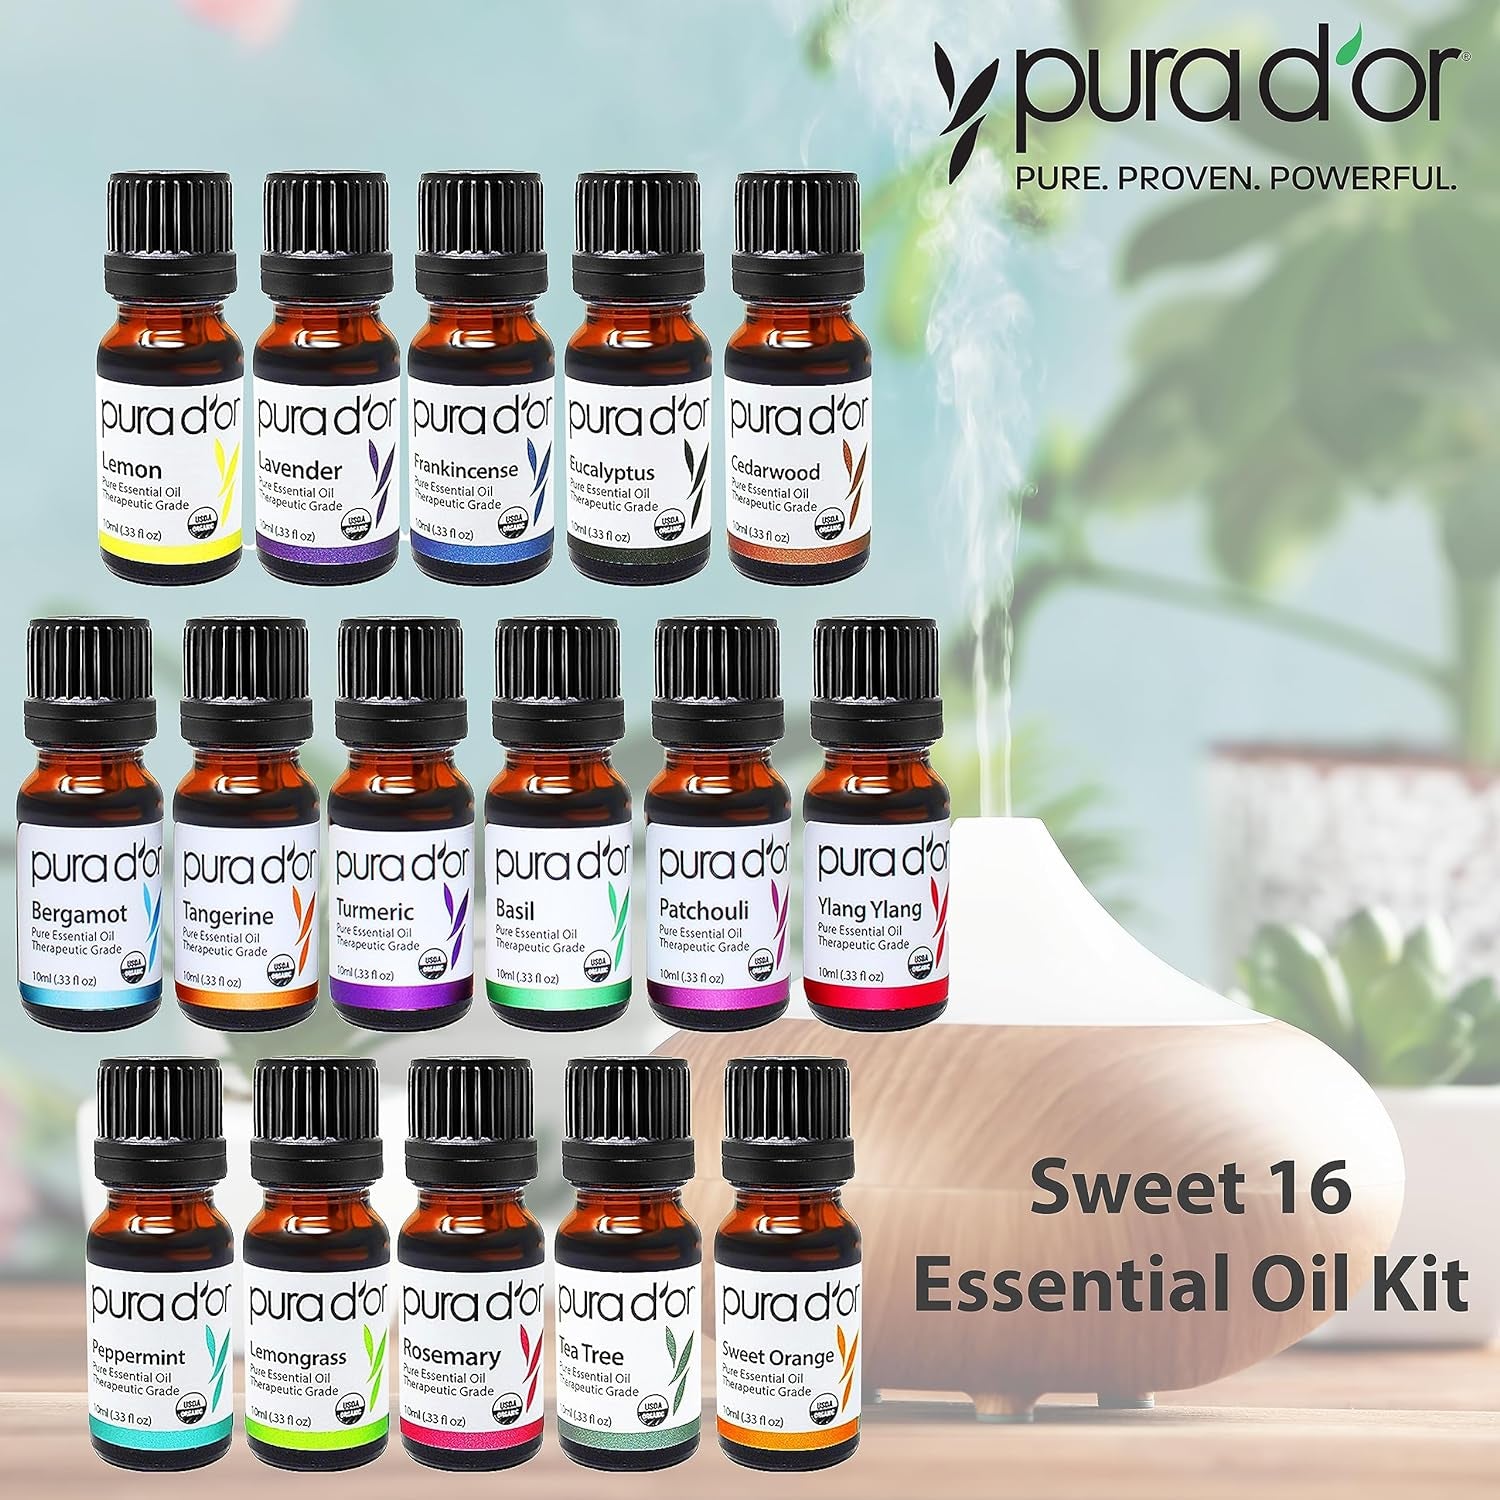 Organic Sweet16 Essential Oils Set - 16X 10M Wood Box Aromatherapy Gift Set - 100% Pure Therapeutic Grade for Relaxation and Wellness (Lavender, Tea Tree, Turmeric, Ylang Ylang and More)